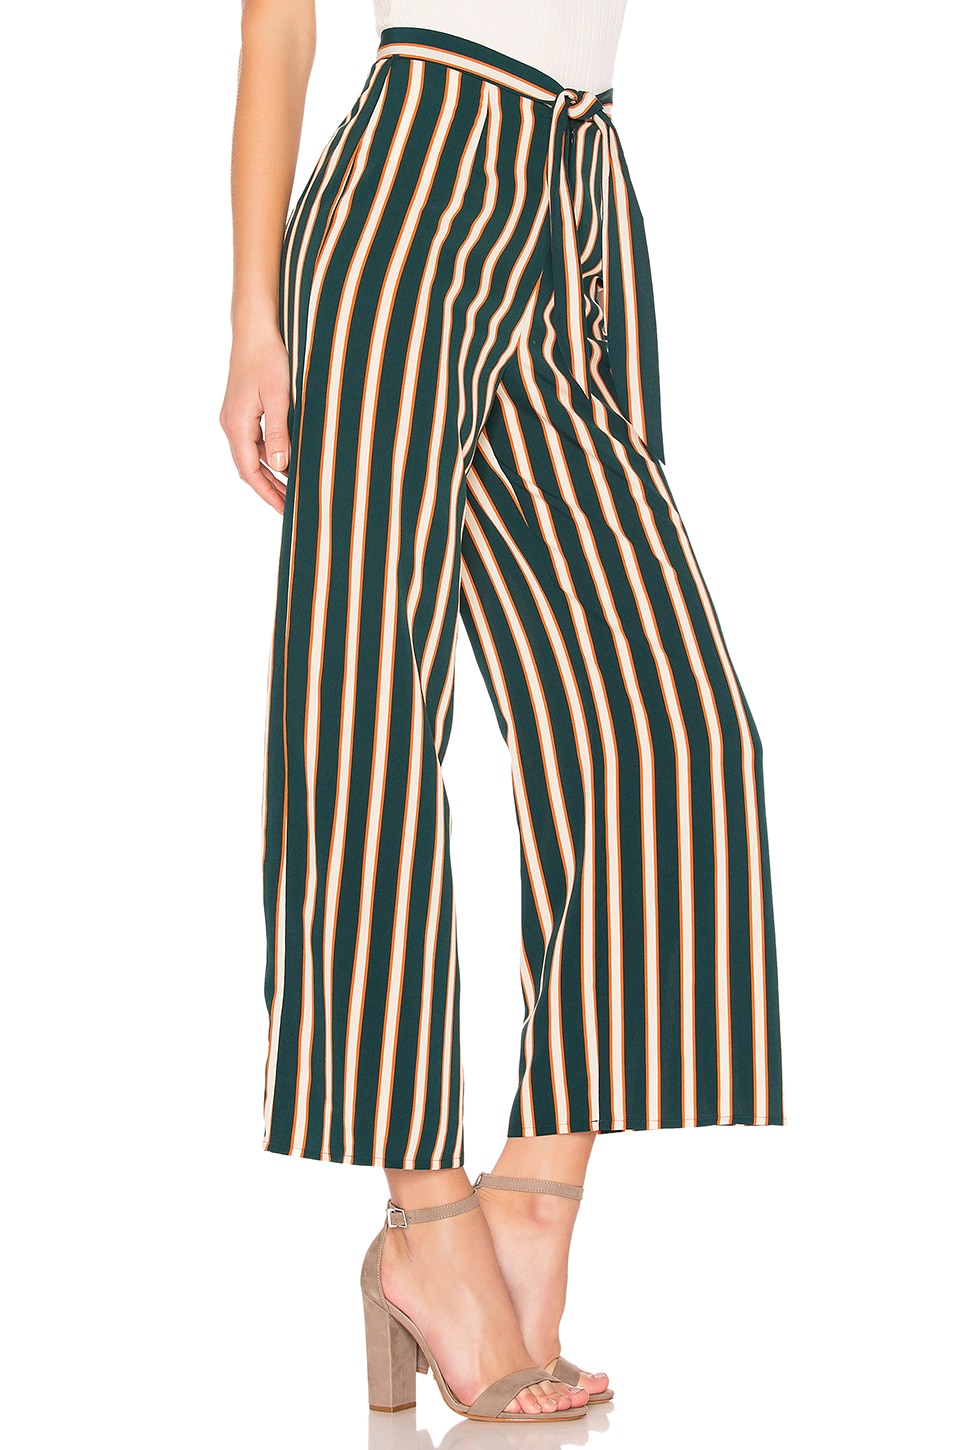 AMUSE SOCIETY Earn Your Stripes Pant in Emerald | REVOLVE